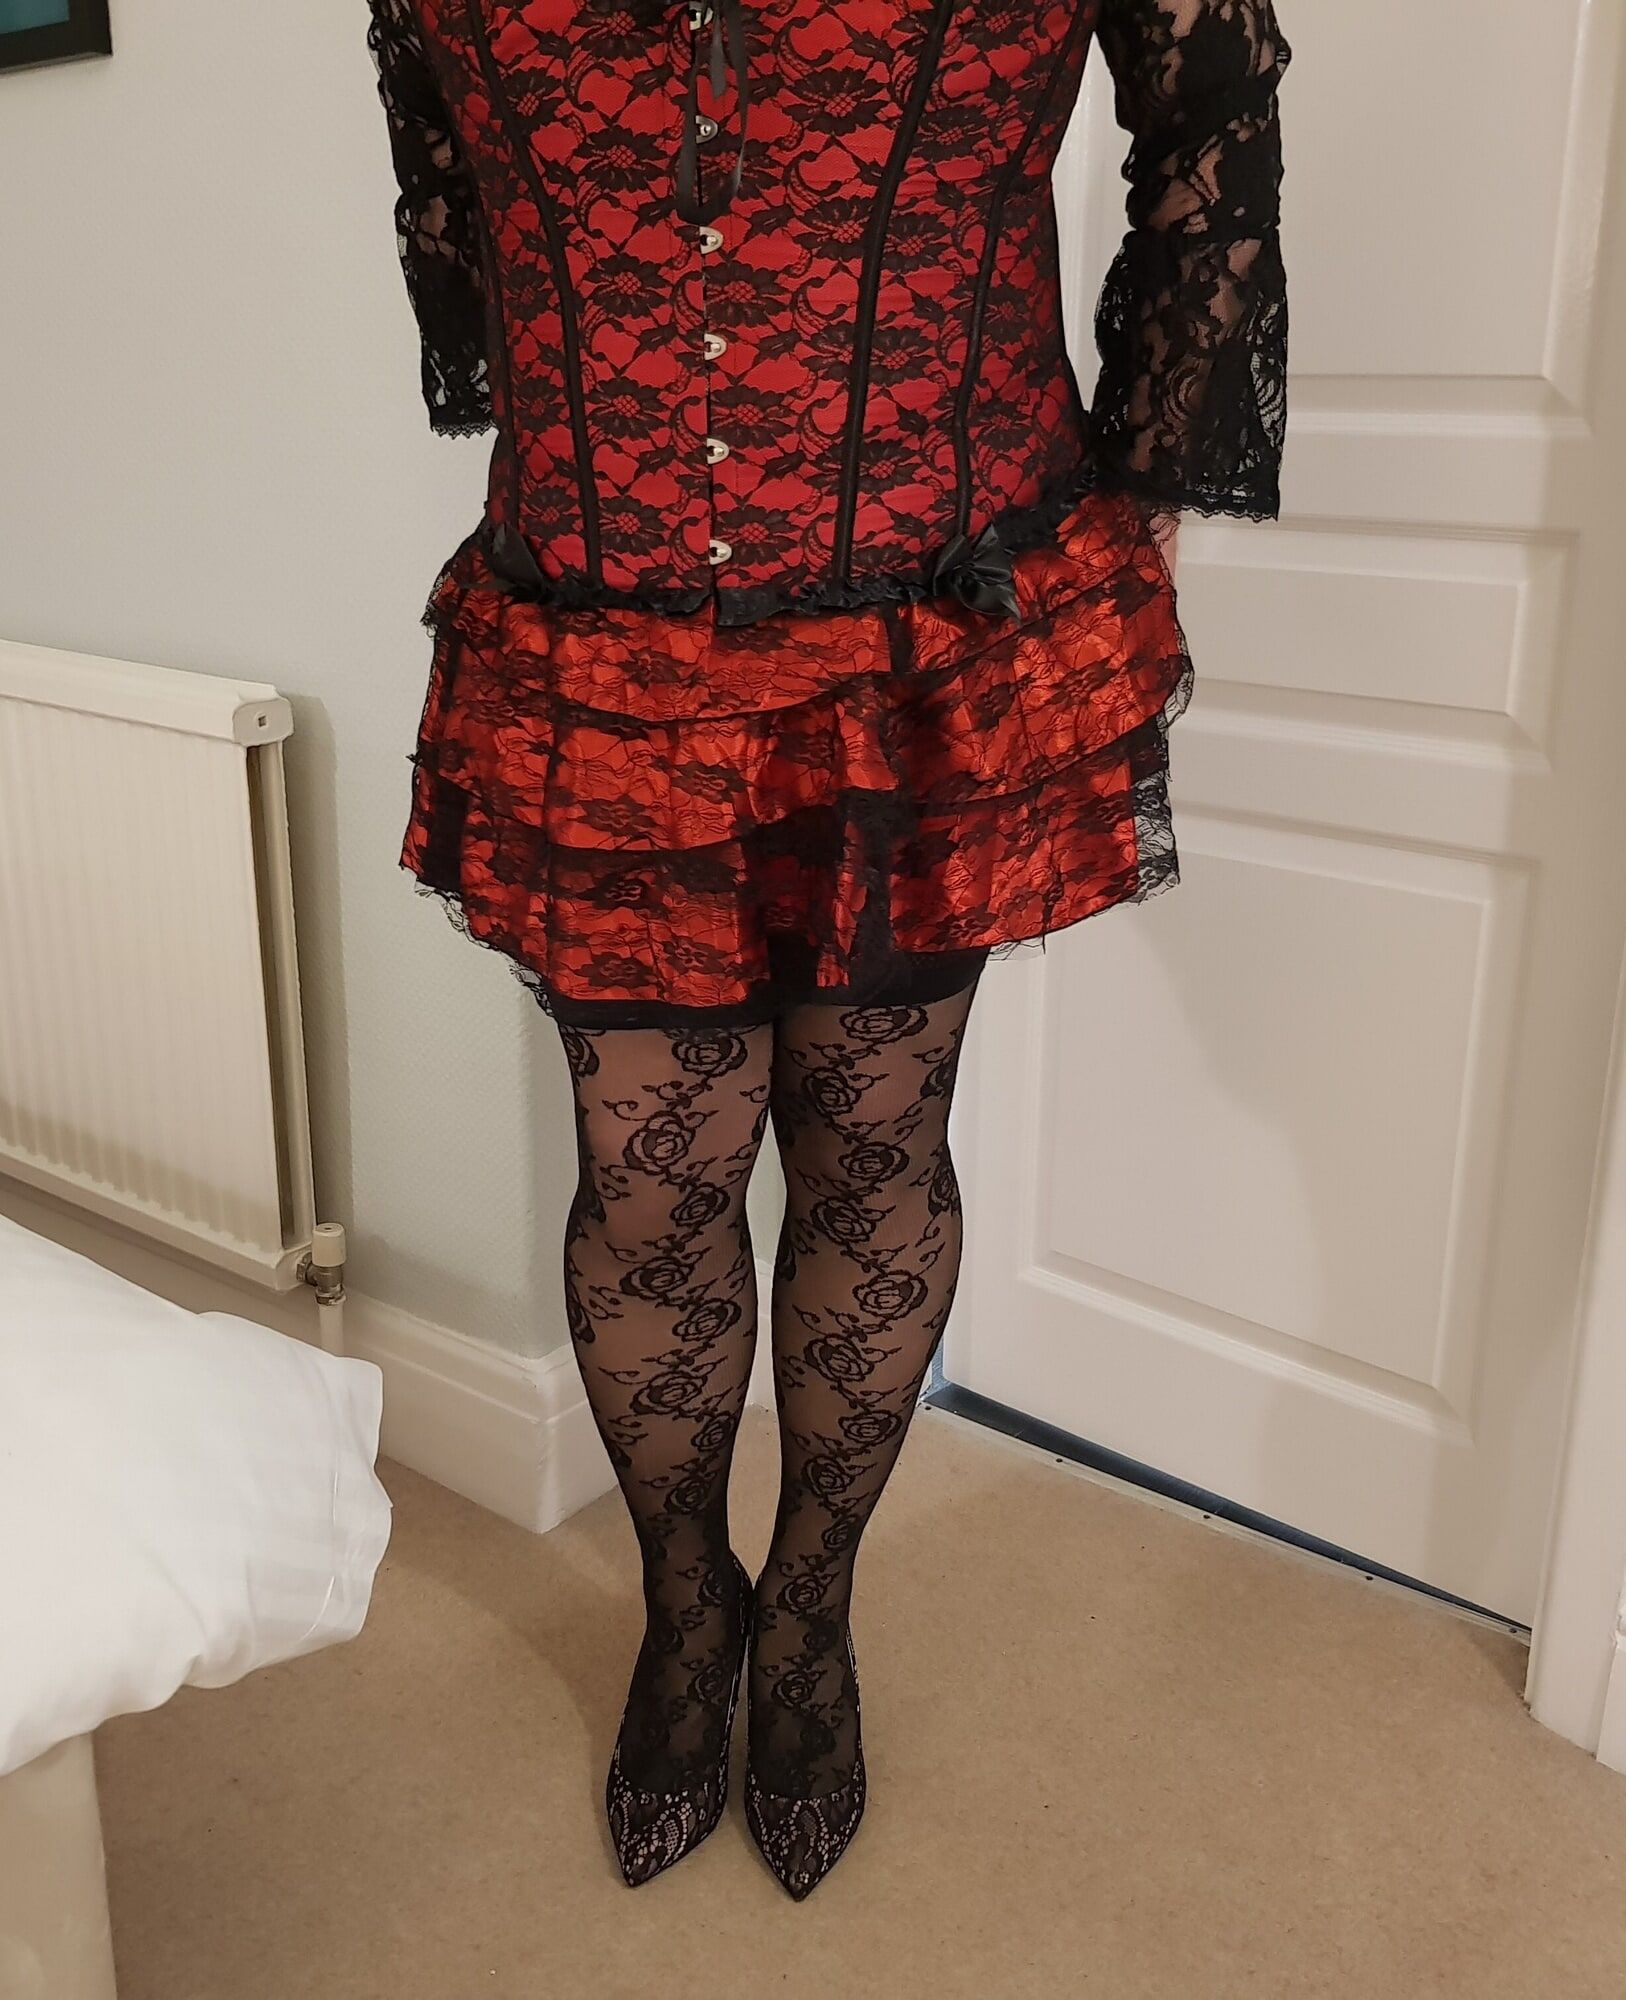 Crossdressing in floral lace lingerie, skirt and heels #2